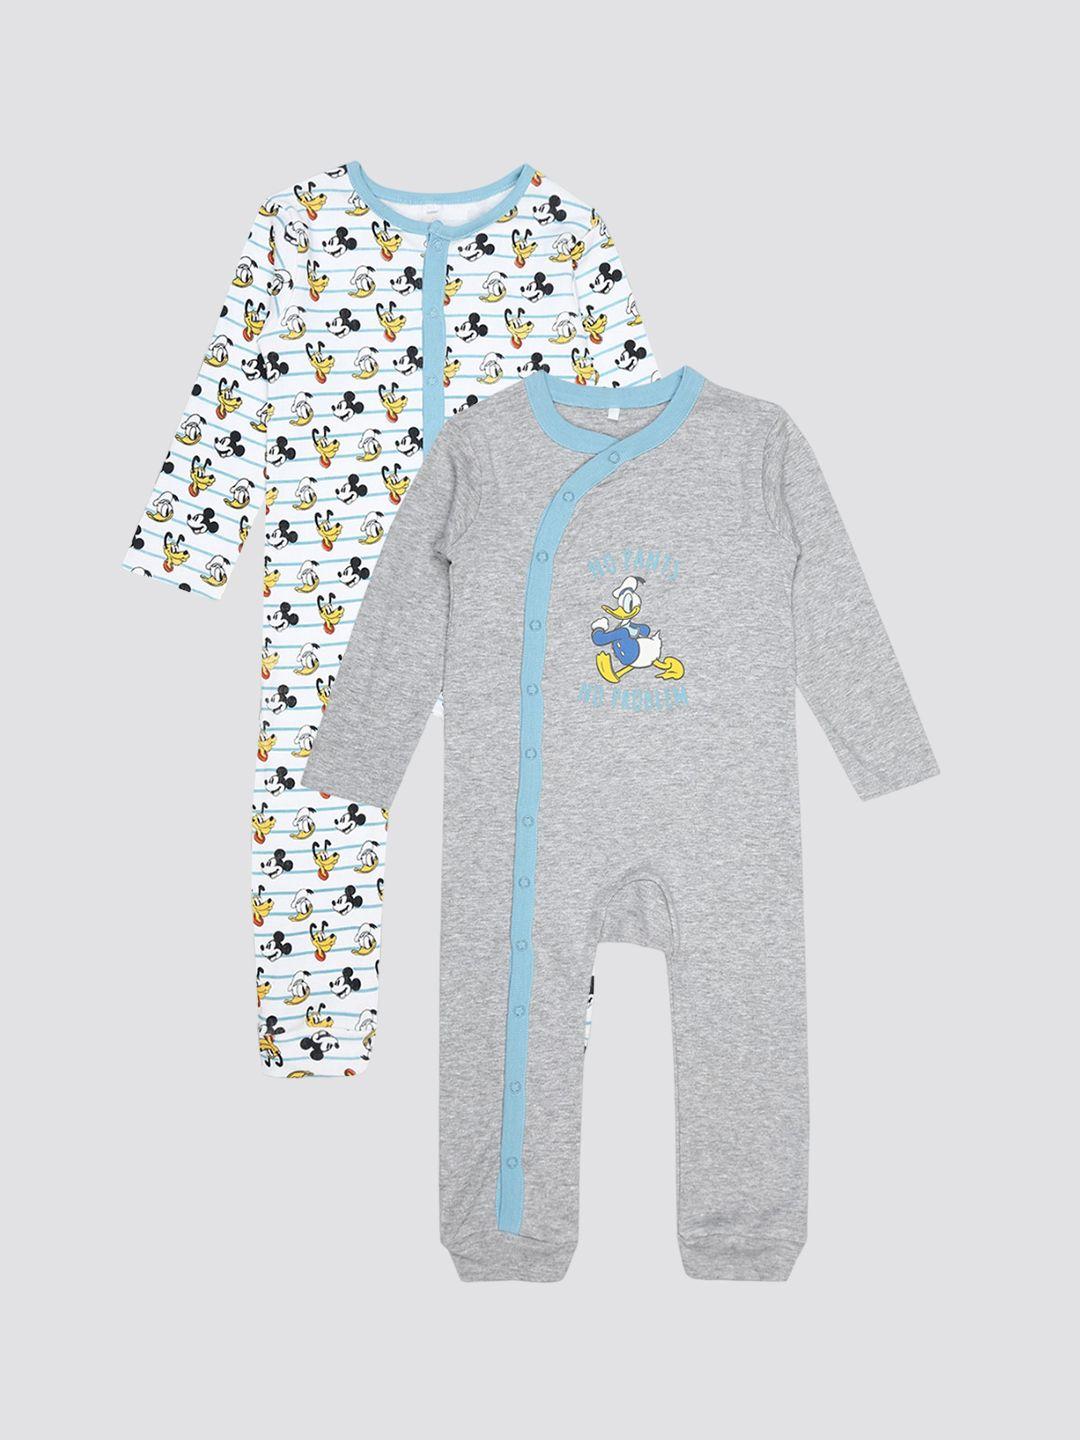 mothercare-infants-kids-pack-of-2-pure-cotton-printed-rompers